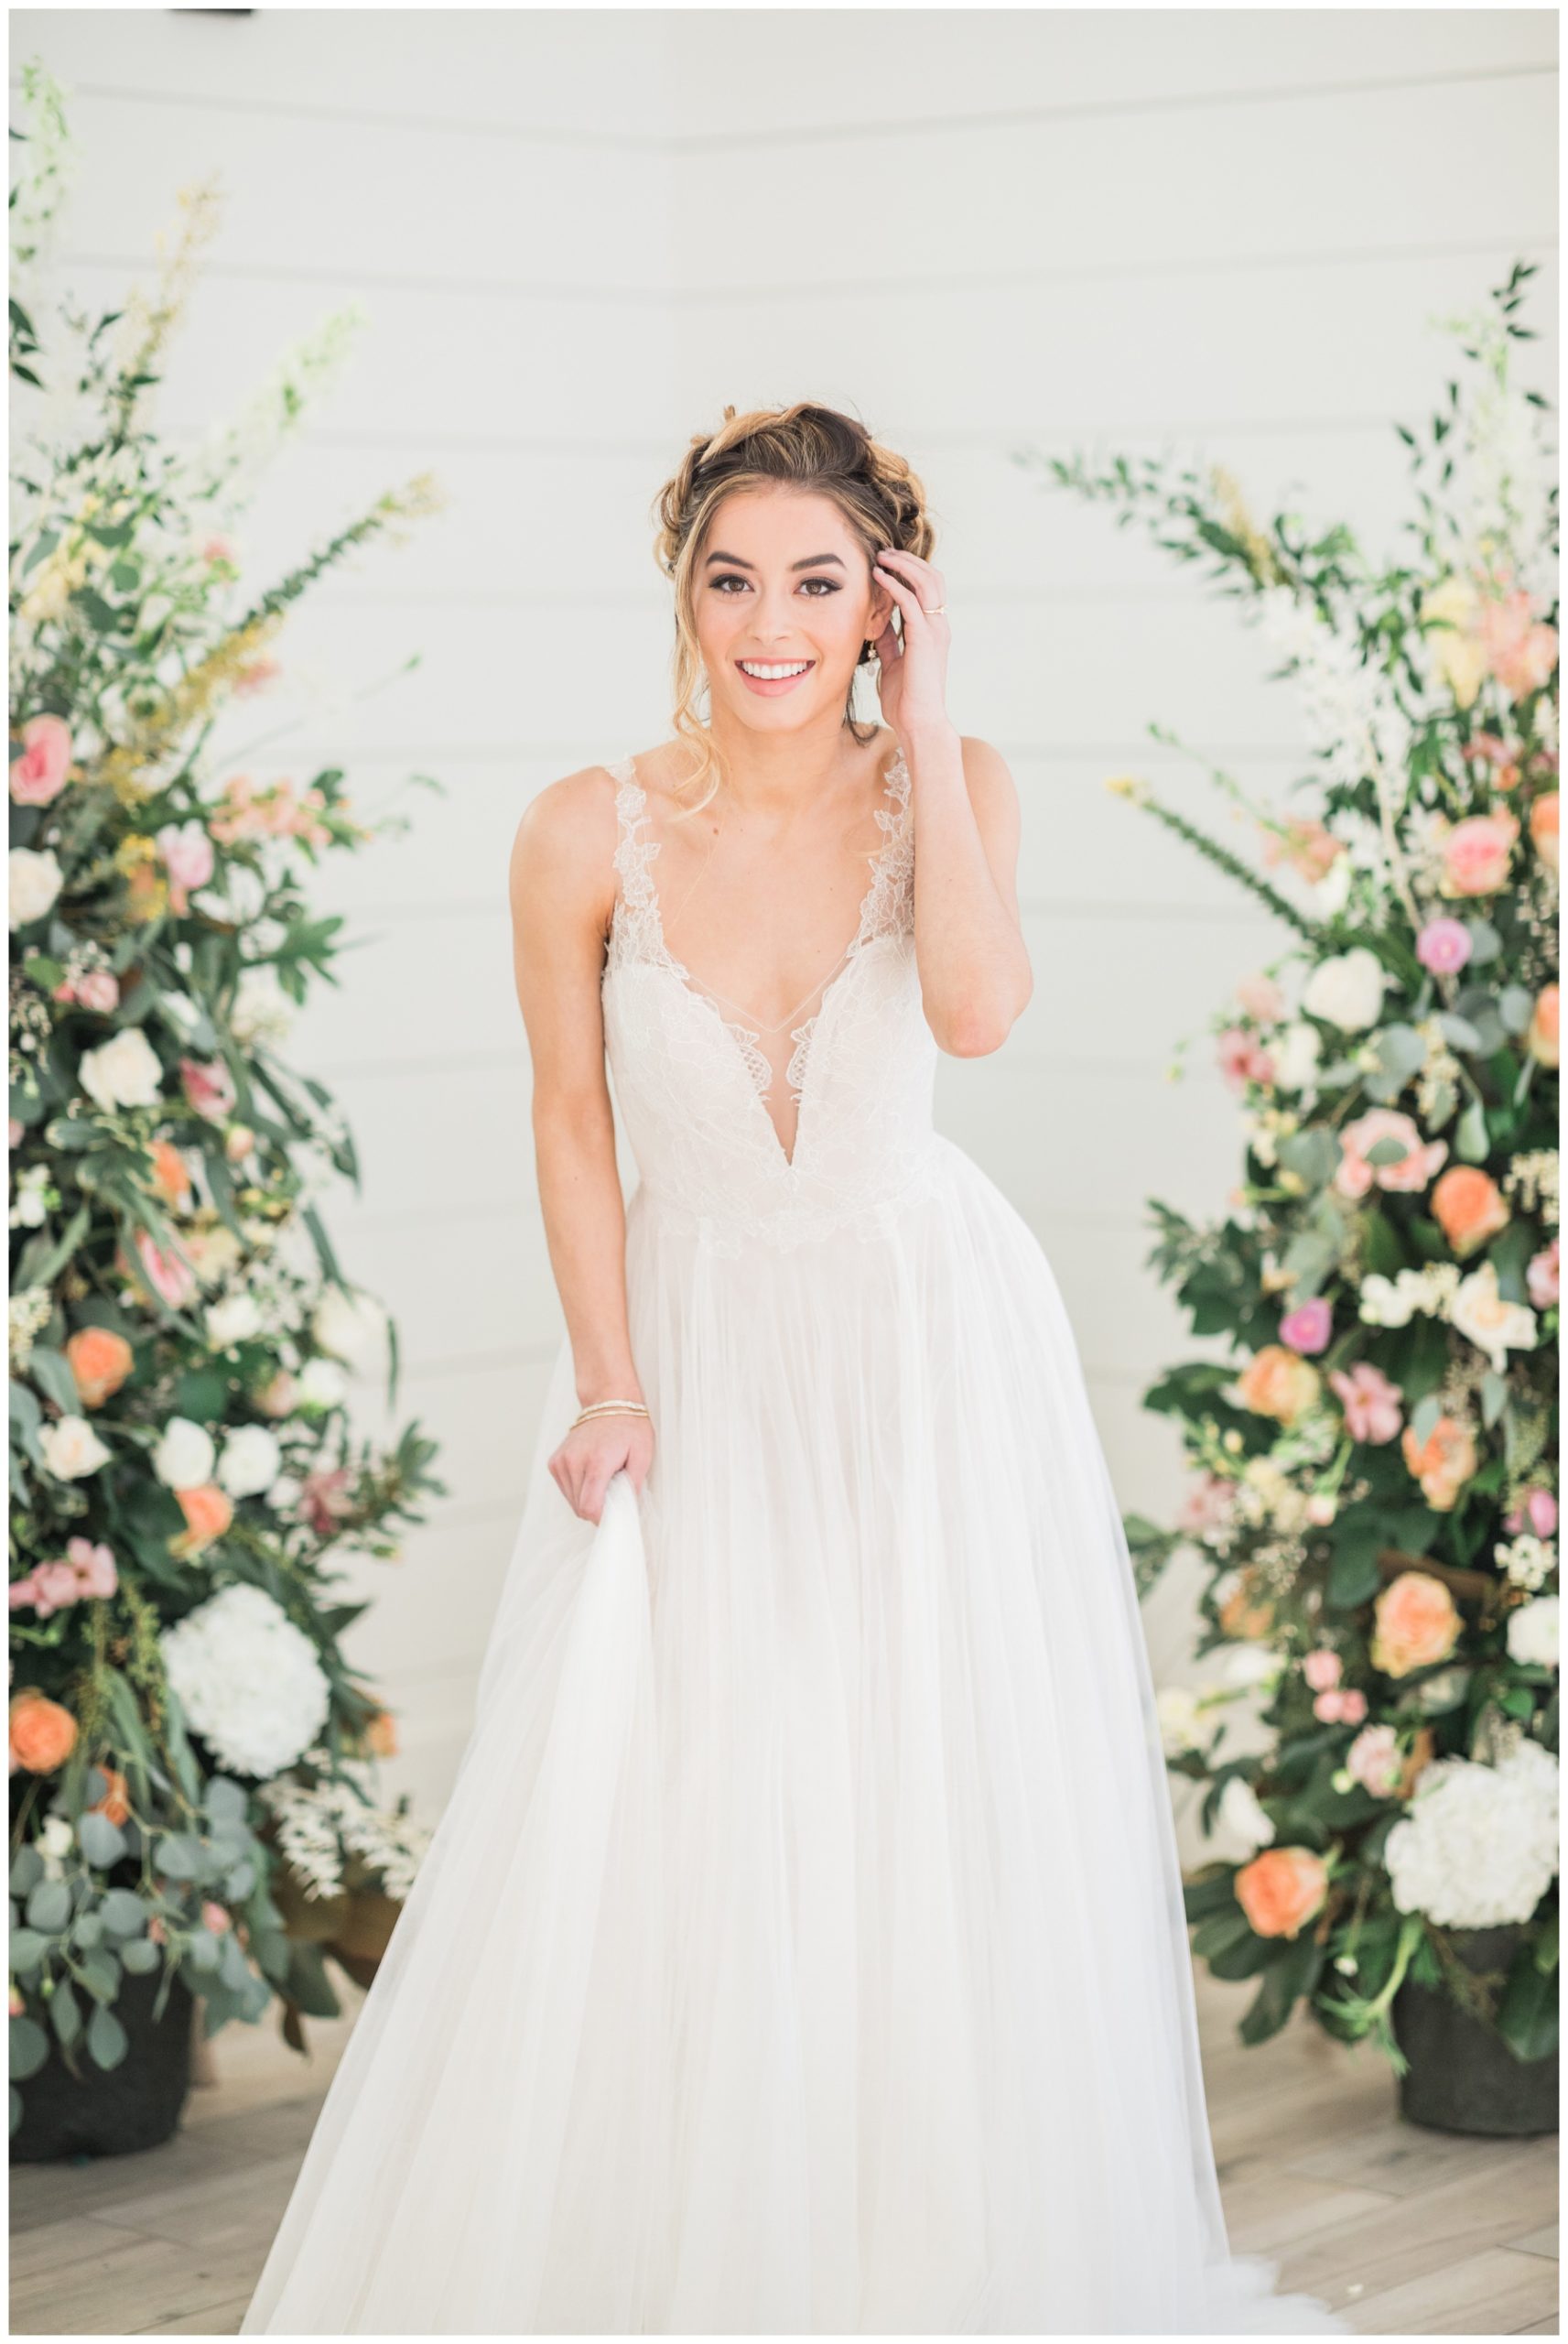 Bride in a BHLDN gown with deep v neckline and tulle skirt